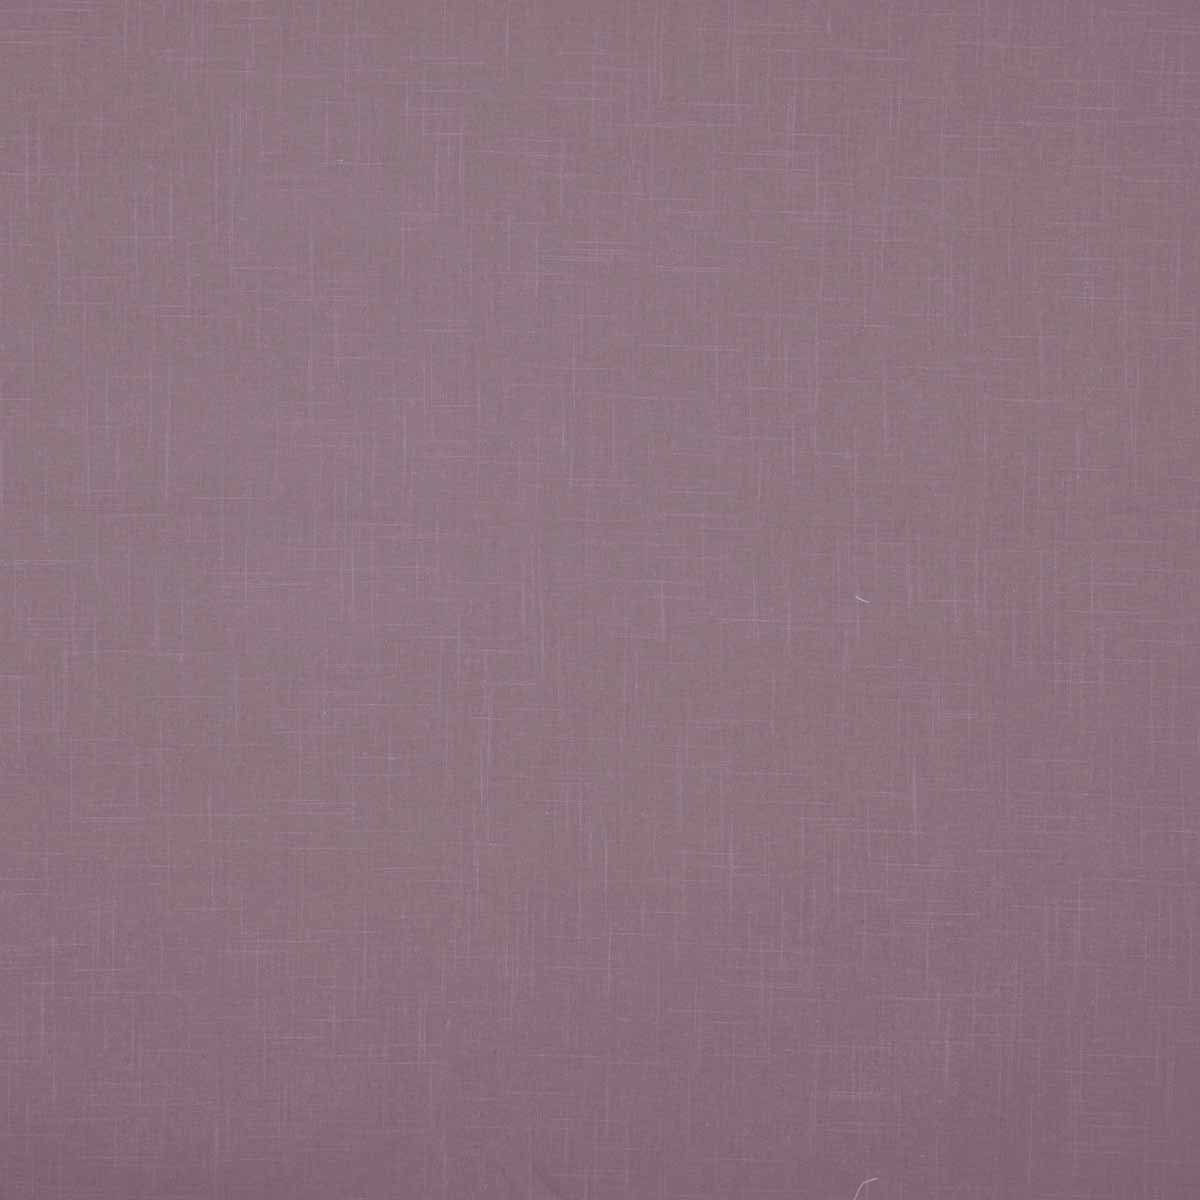 Linen Curtain Fabric Mulberry